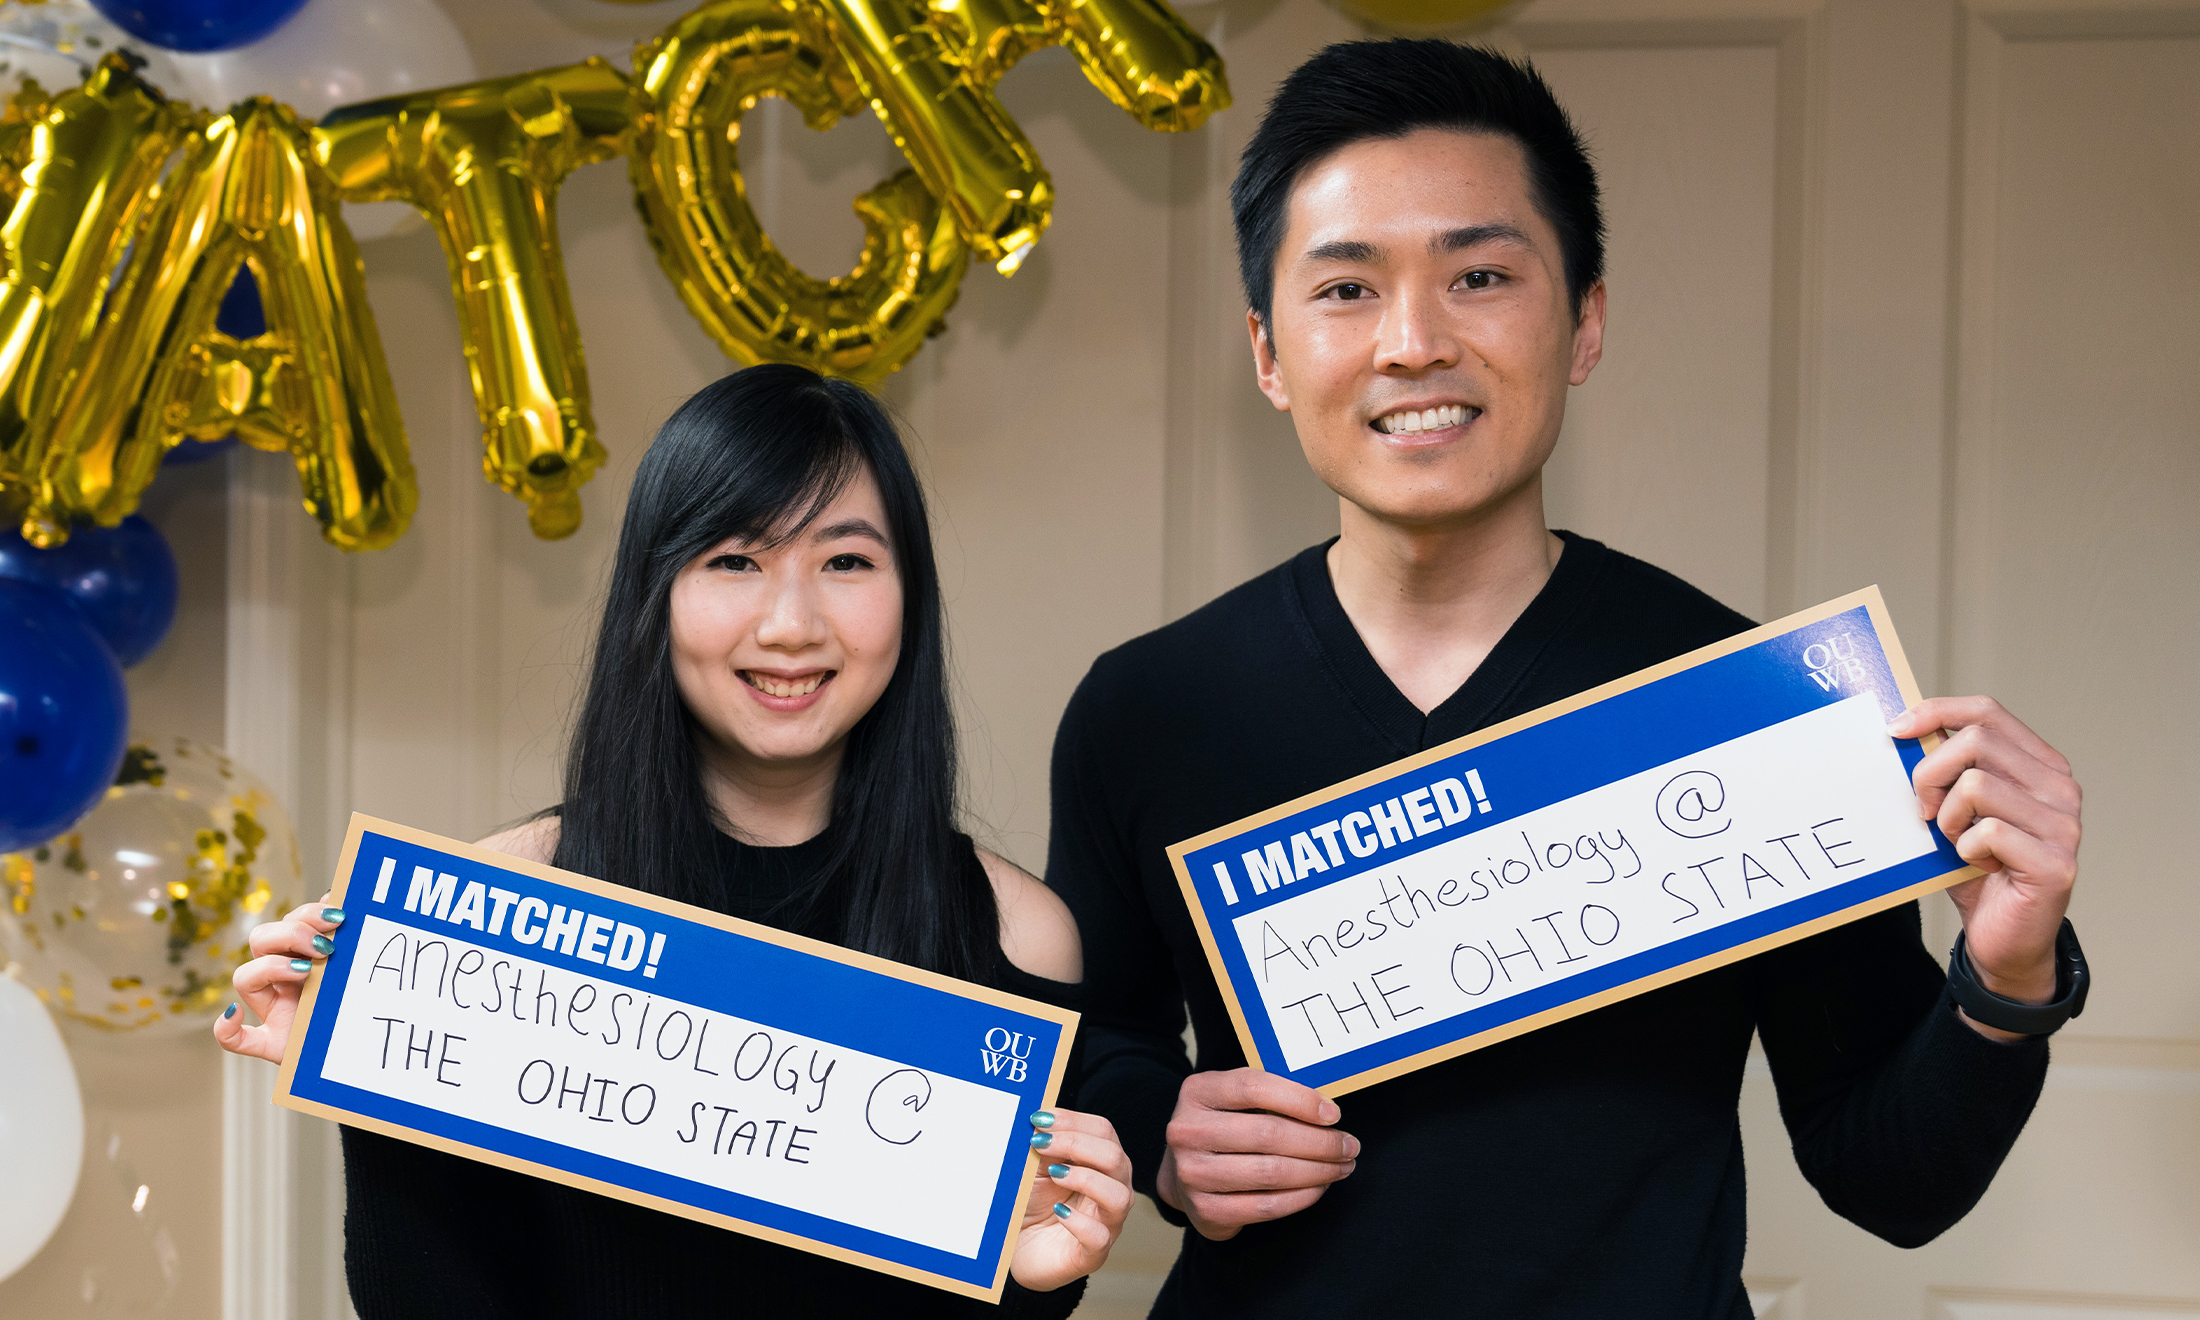 An image of two OUWB students who successfully matched as a couple